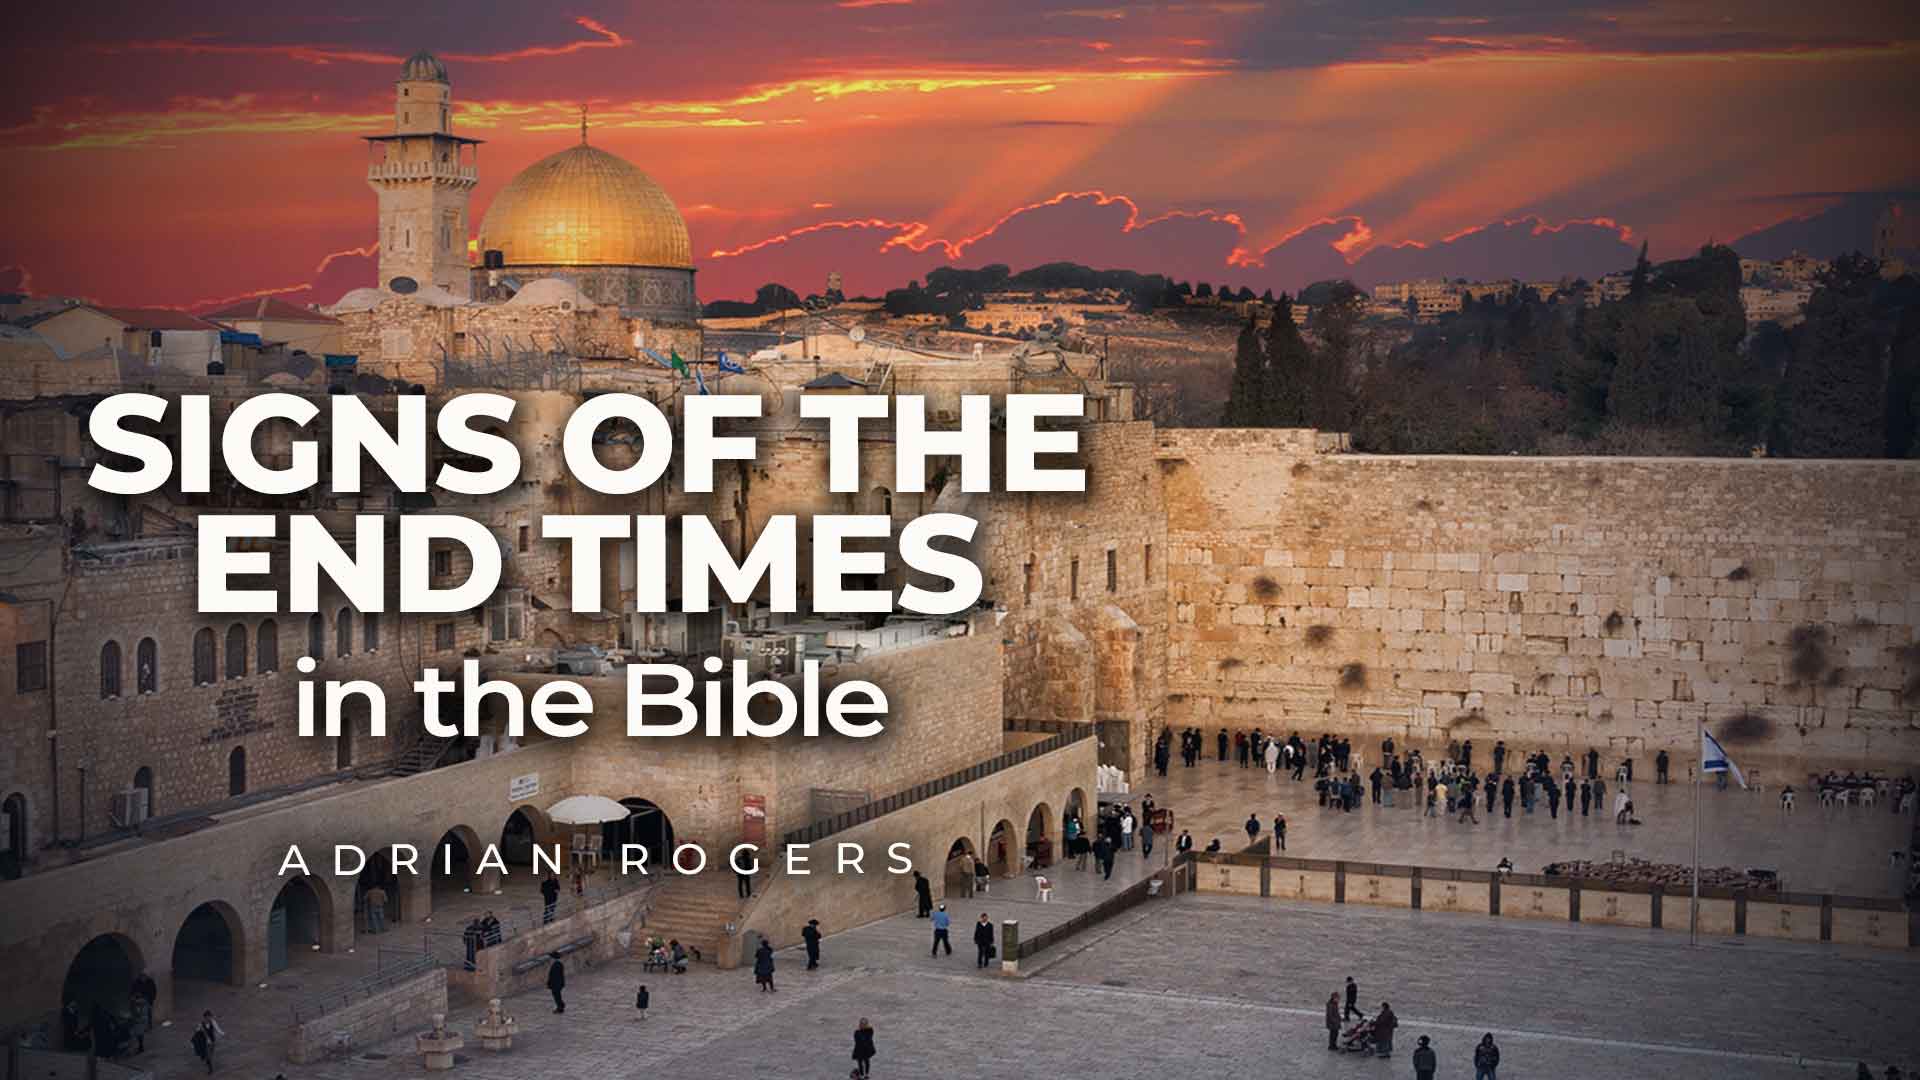 Signs of the End Times in the Bible 1920x1080